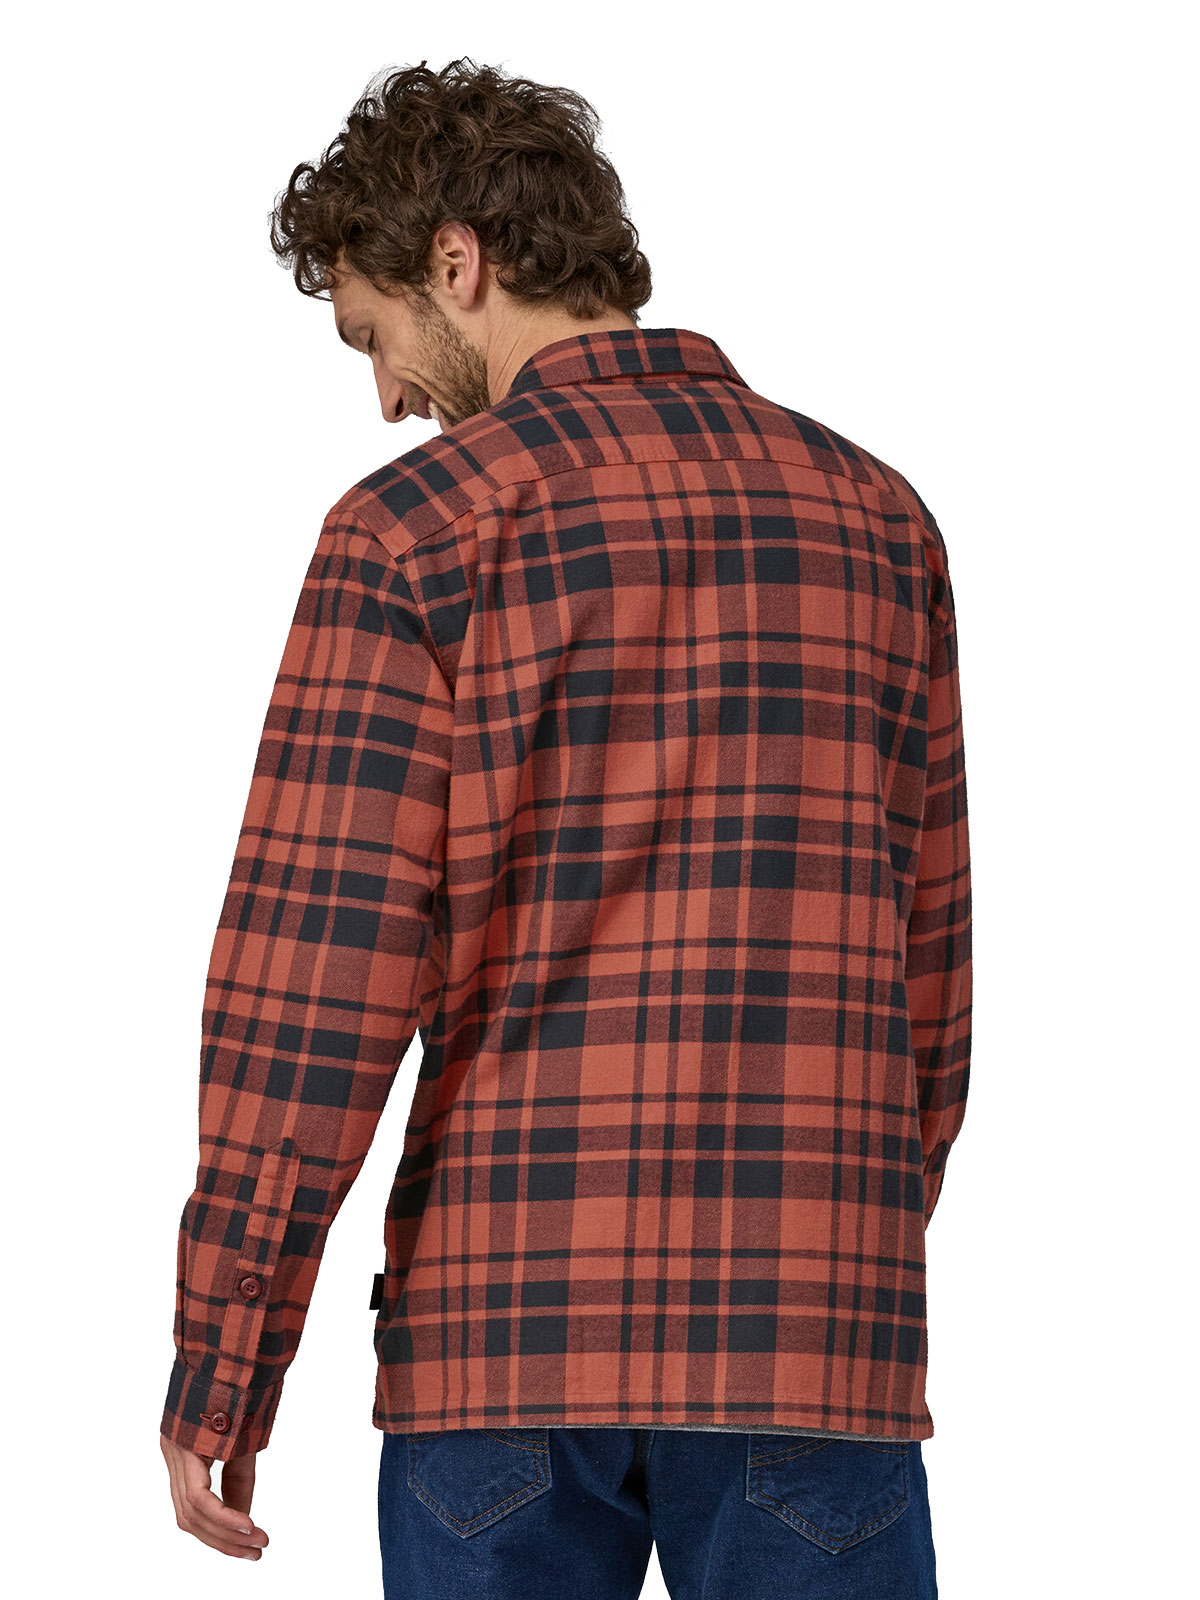 Midweight Organic Cotton Fjord Flannel shirt (herre)